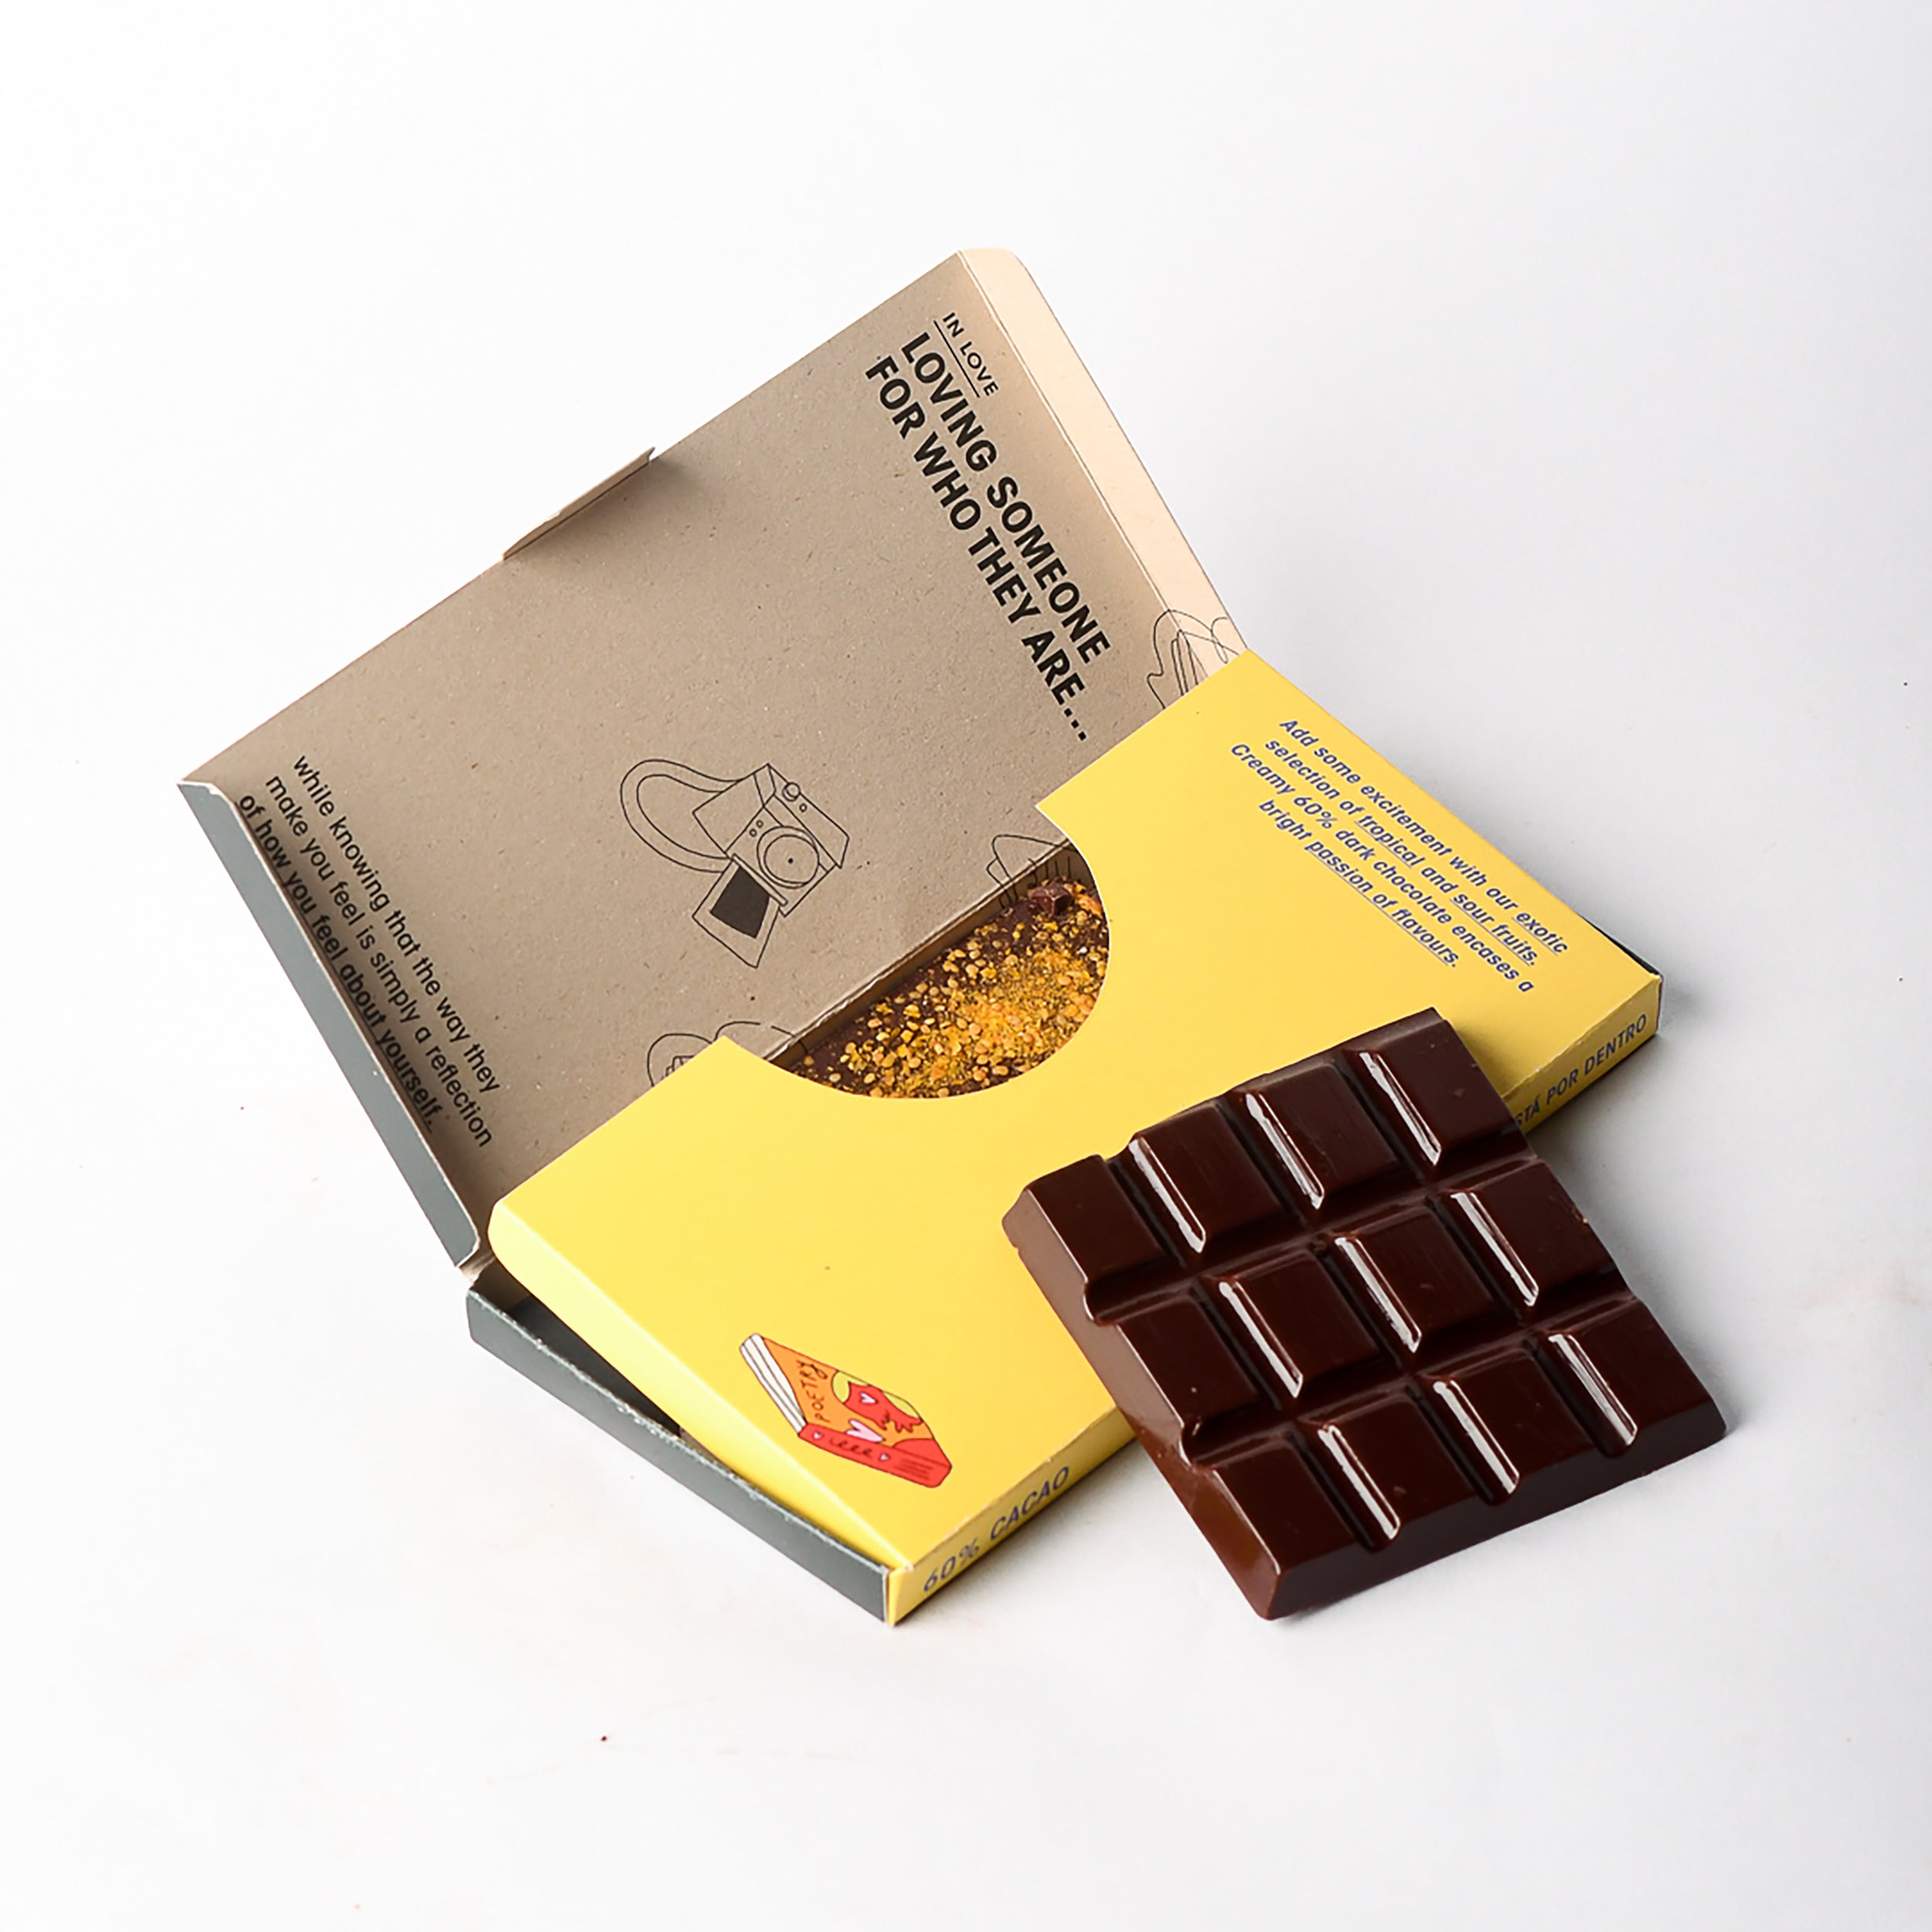 Naked Choco In Love Chocolate Bar Packaging 60% Goldenberry Passionfruit